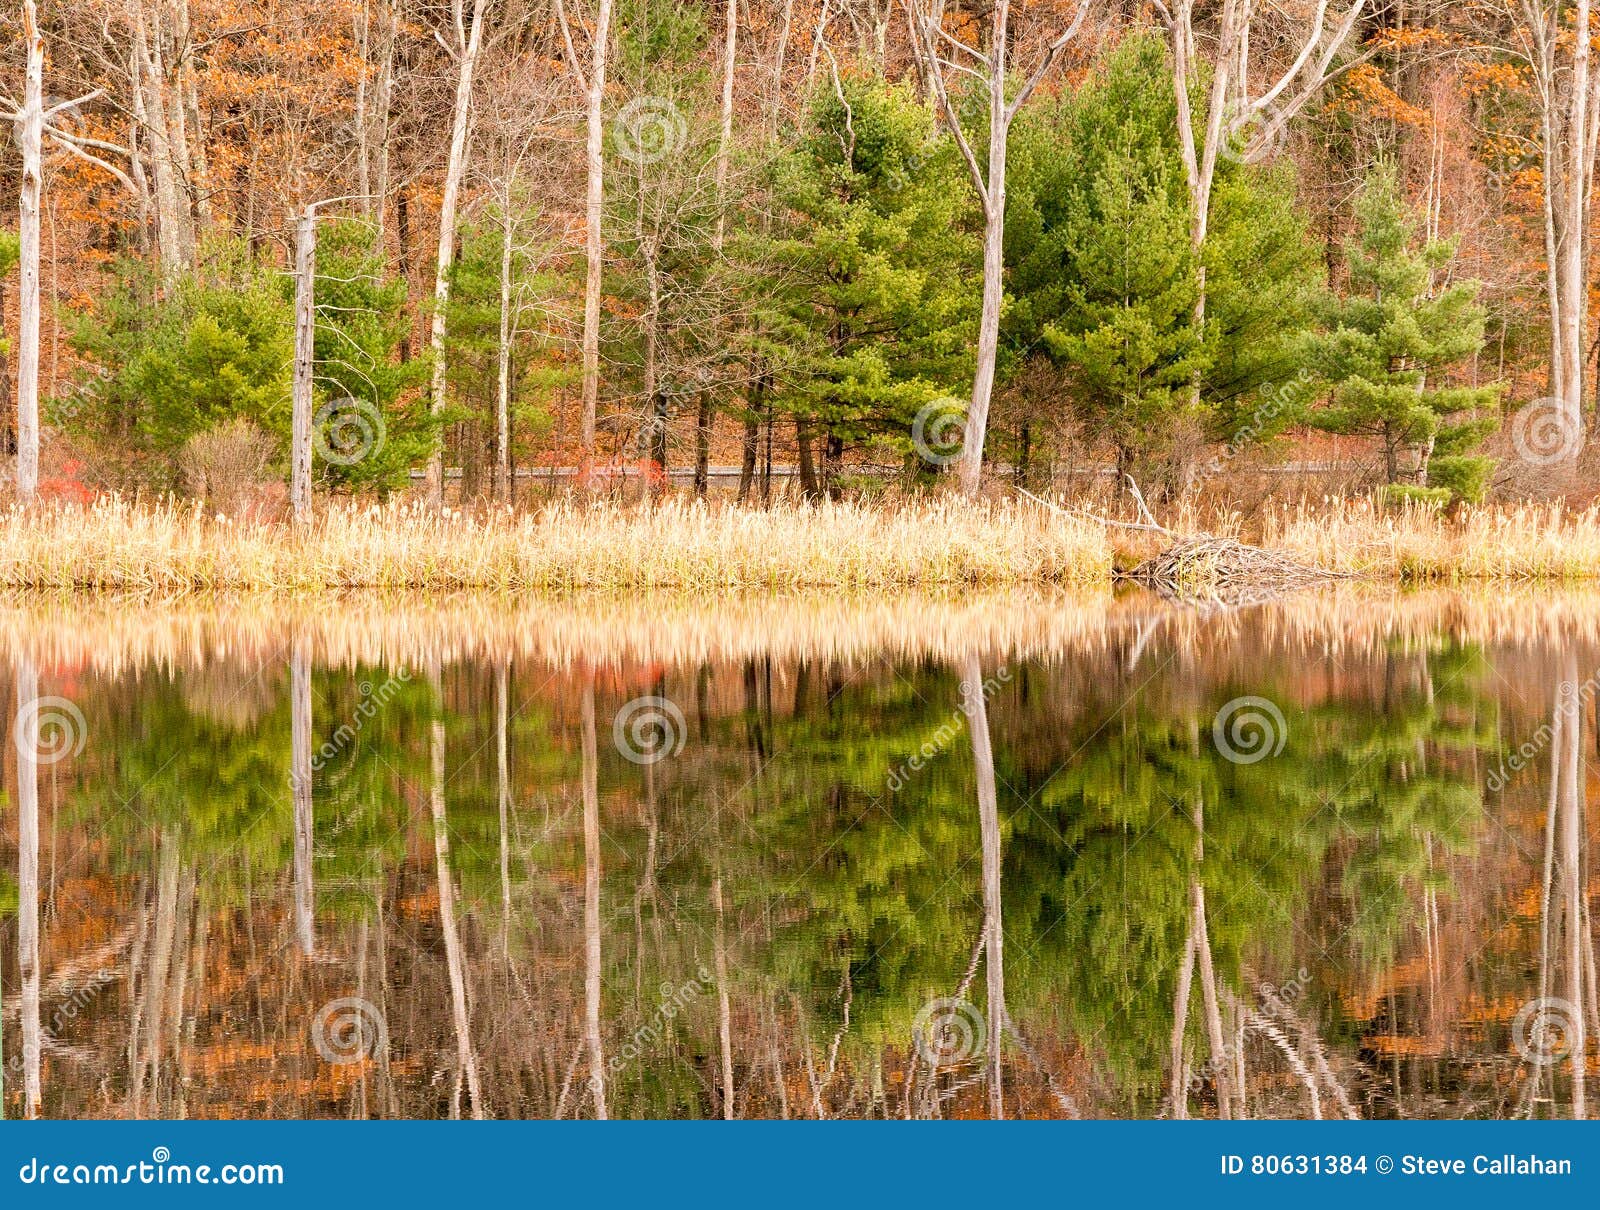 evergreens, leaf drop trees, reeds and reflections on pond and fall color